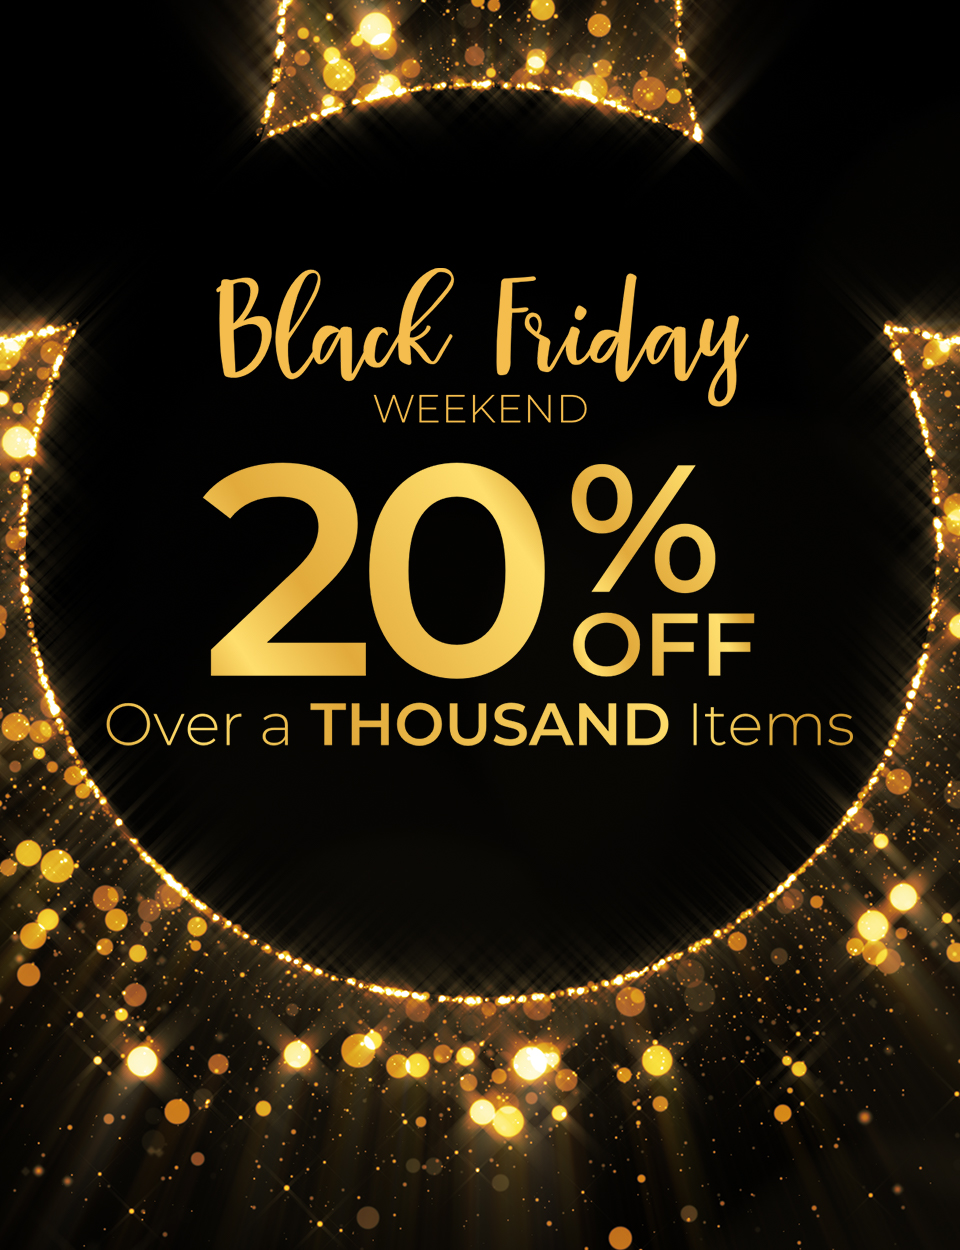 Black Friday Weekend - 20% off over a thousand items